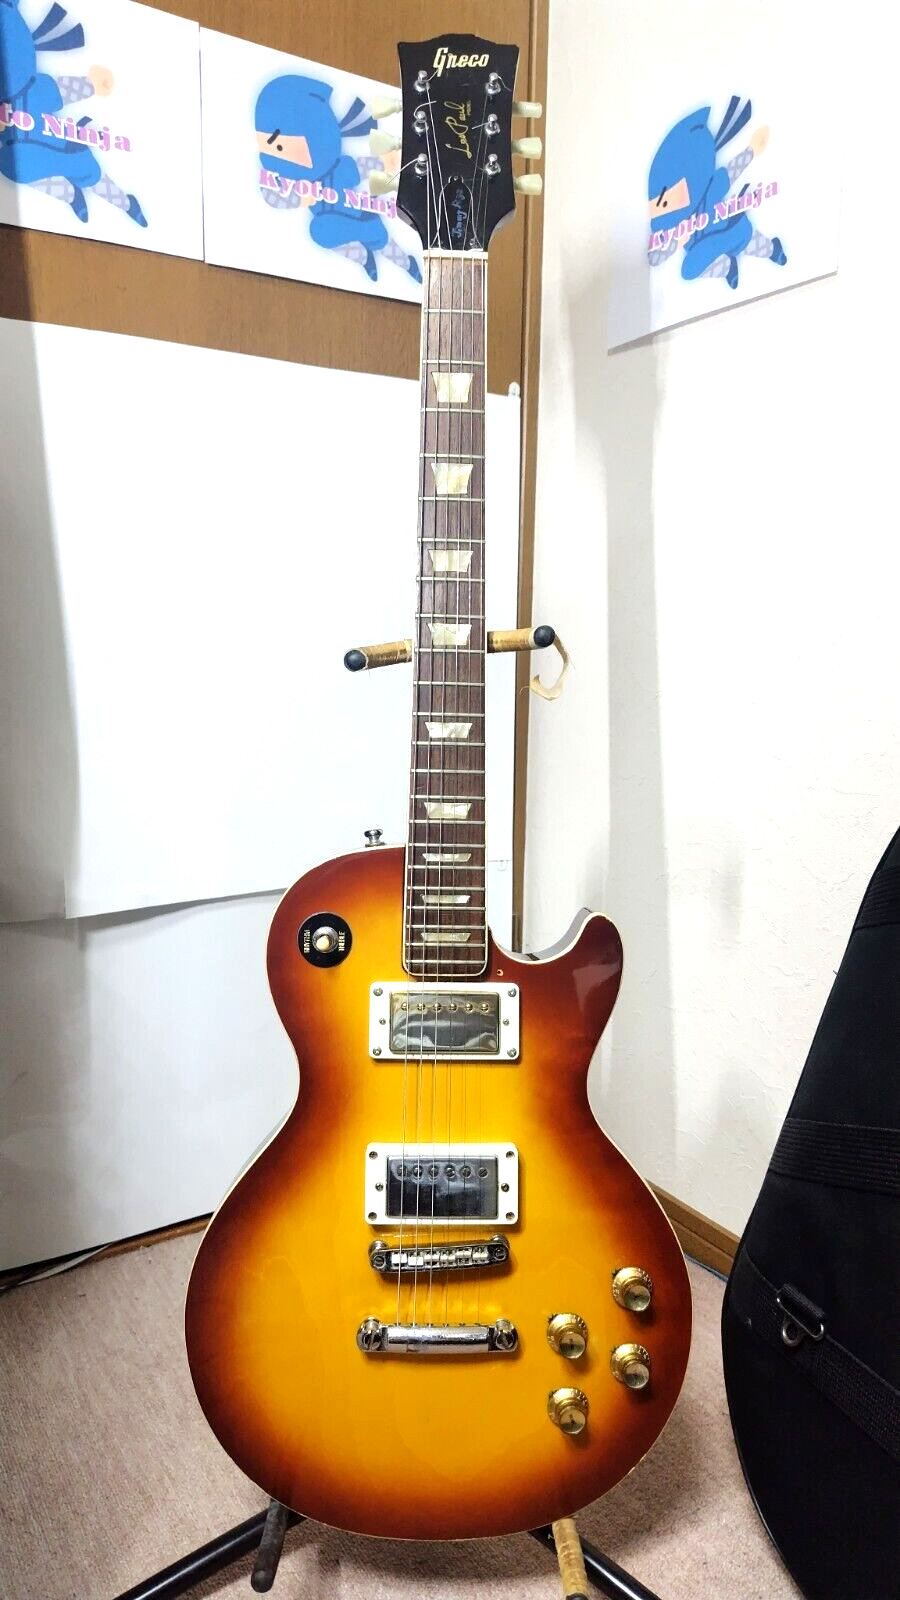 Greco EG Made in Japan Les Paul Type 1970s Sunburst Used Guitar F/S From Japan